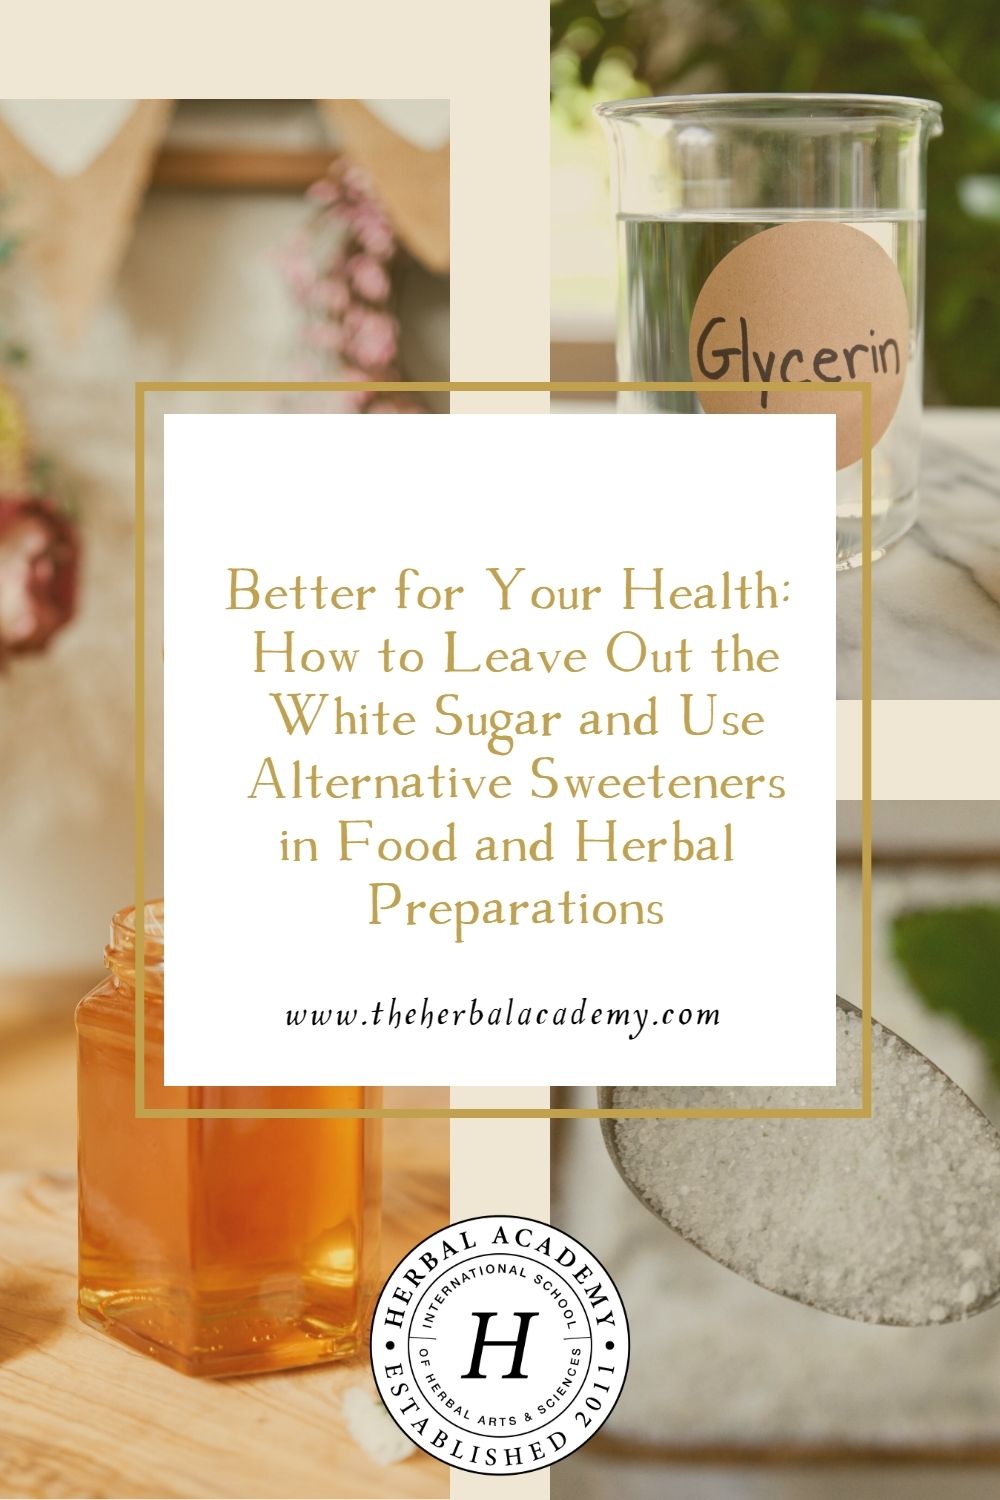 Better for Your Health: How to Leave Out the White Sugar and Use Alternative Sweeteners in Food and Herbal Preparations | Herbal Academy | You can create delicious, sweet treats and herbal preparations without compromising on flavor or your health by using alternative sweeteners. 